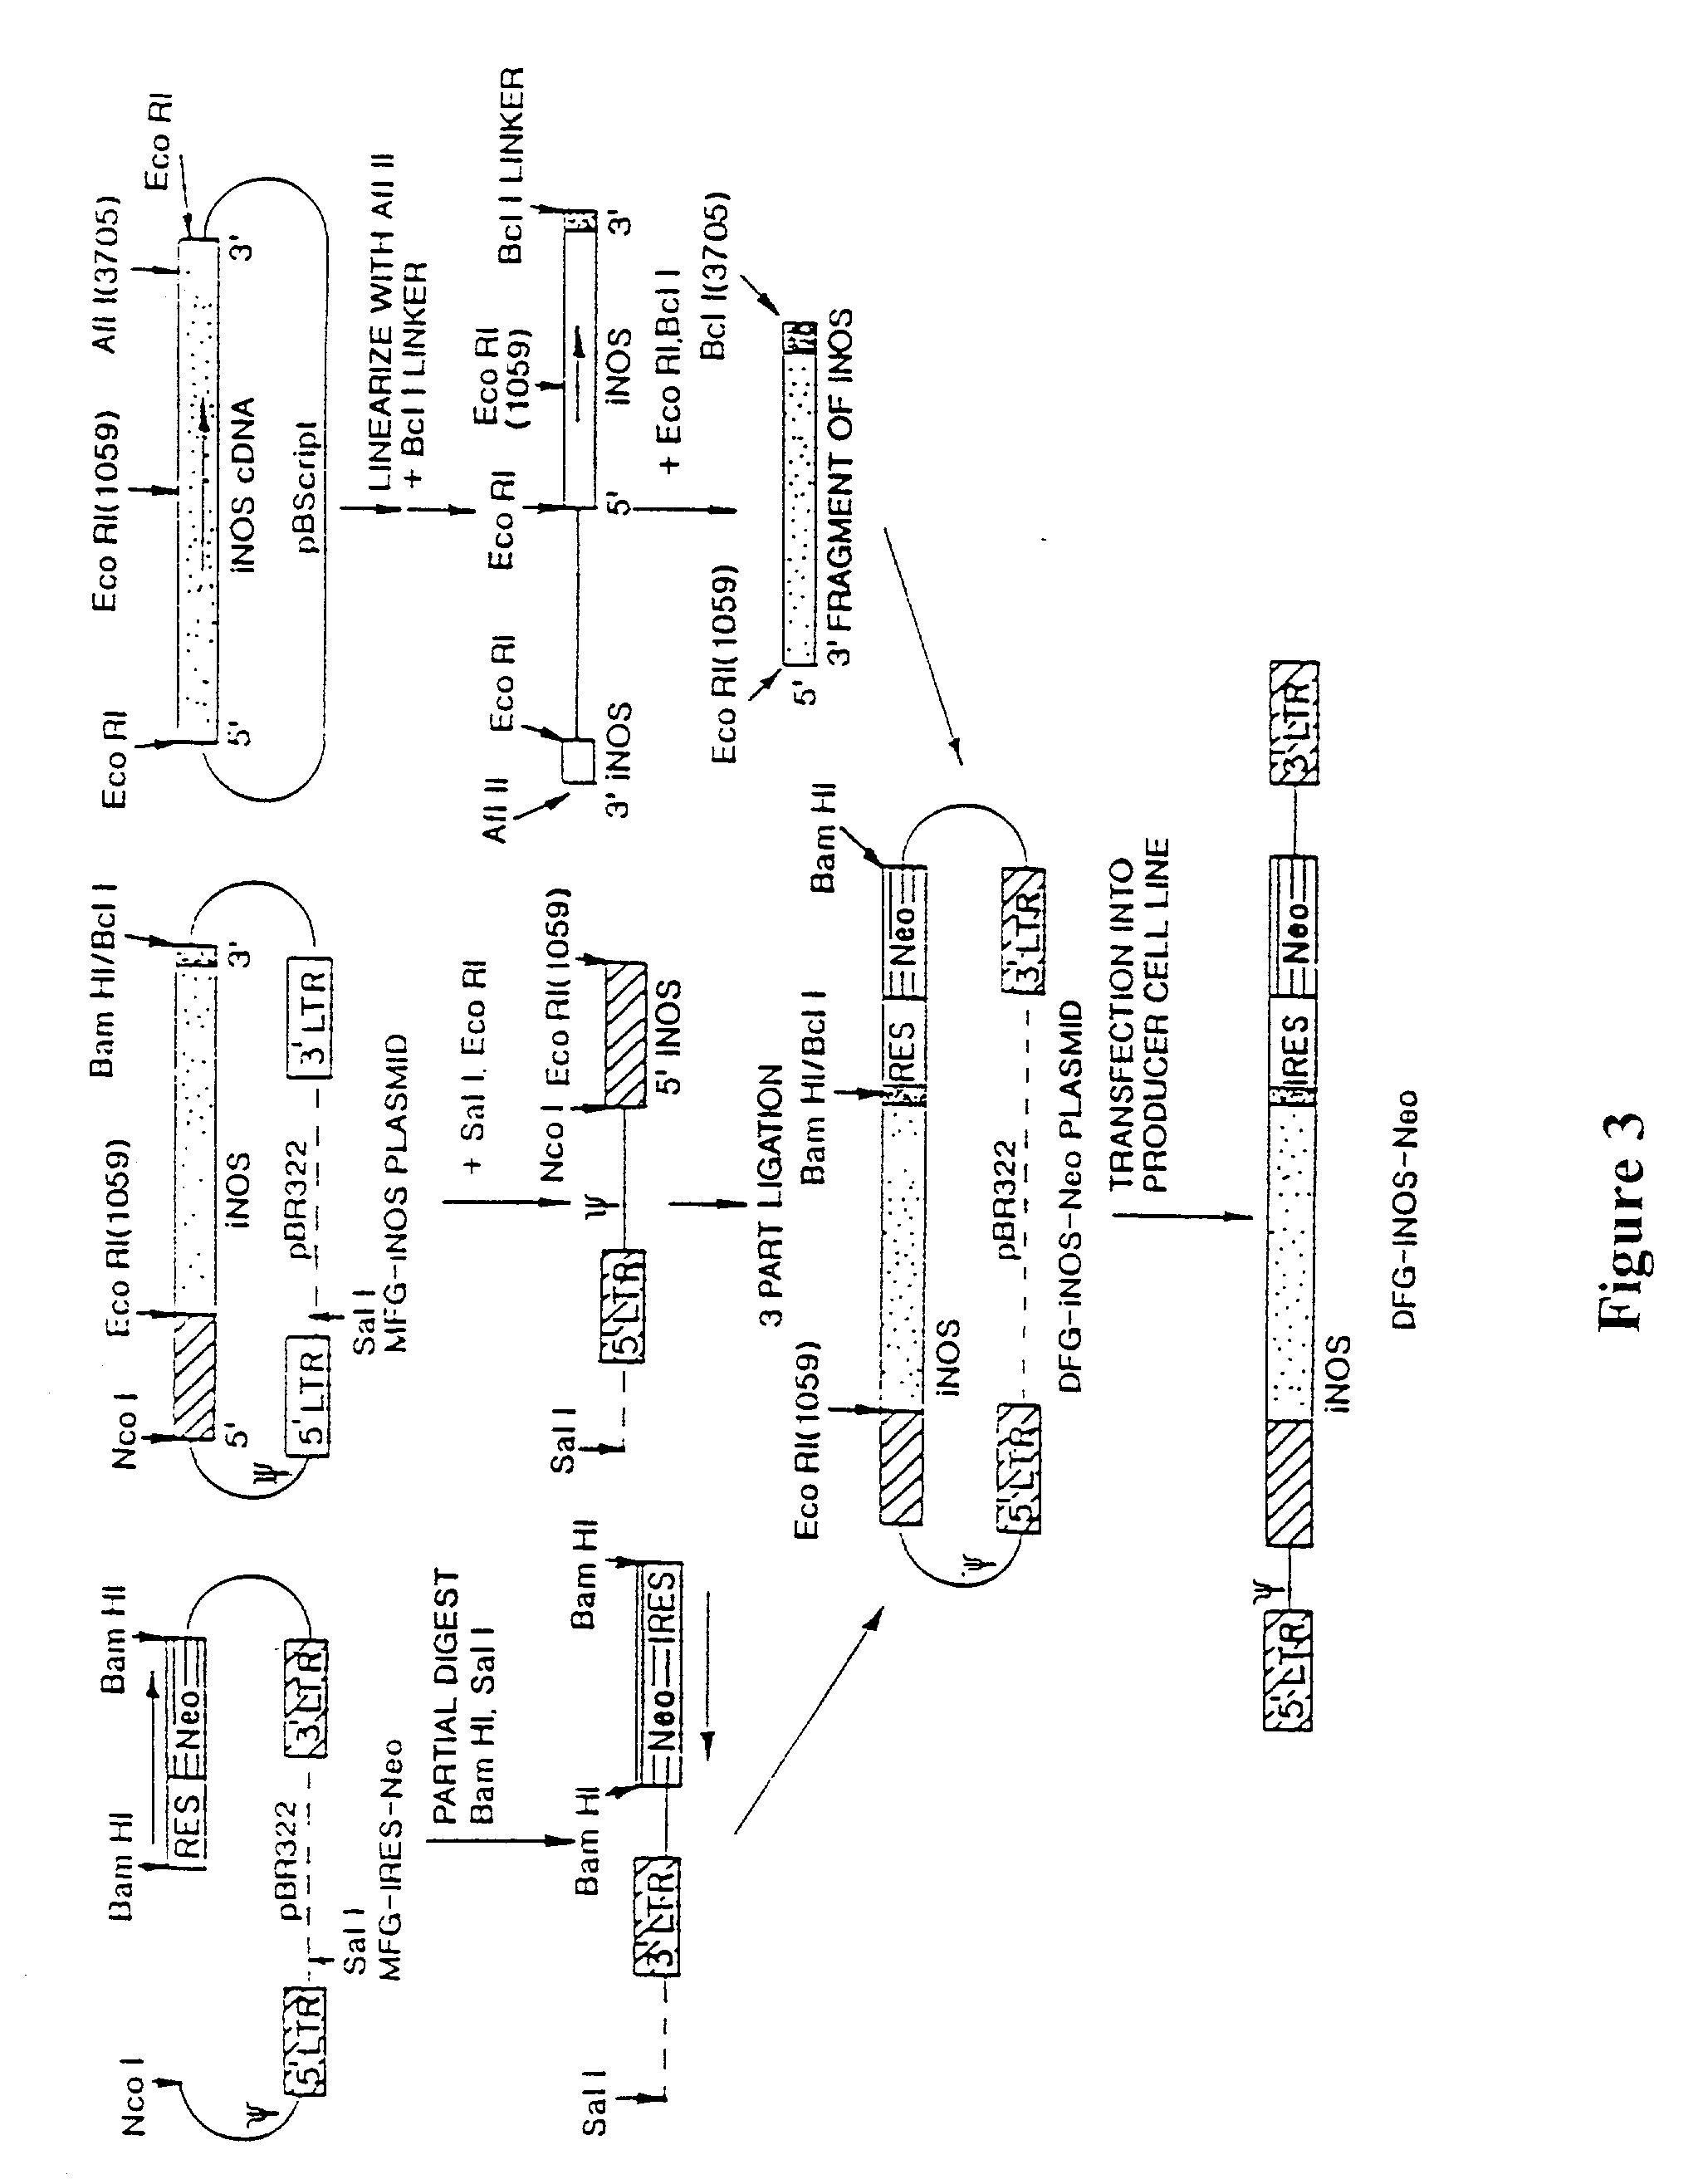 Inducible nitric oxide synthase for treatment of disease